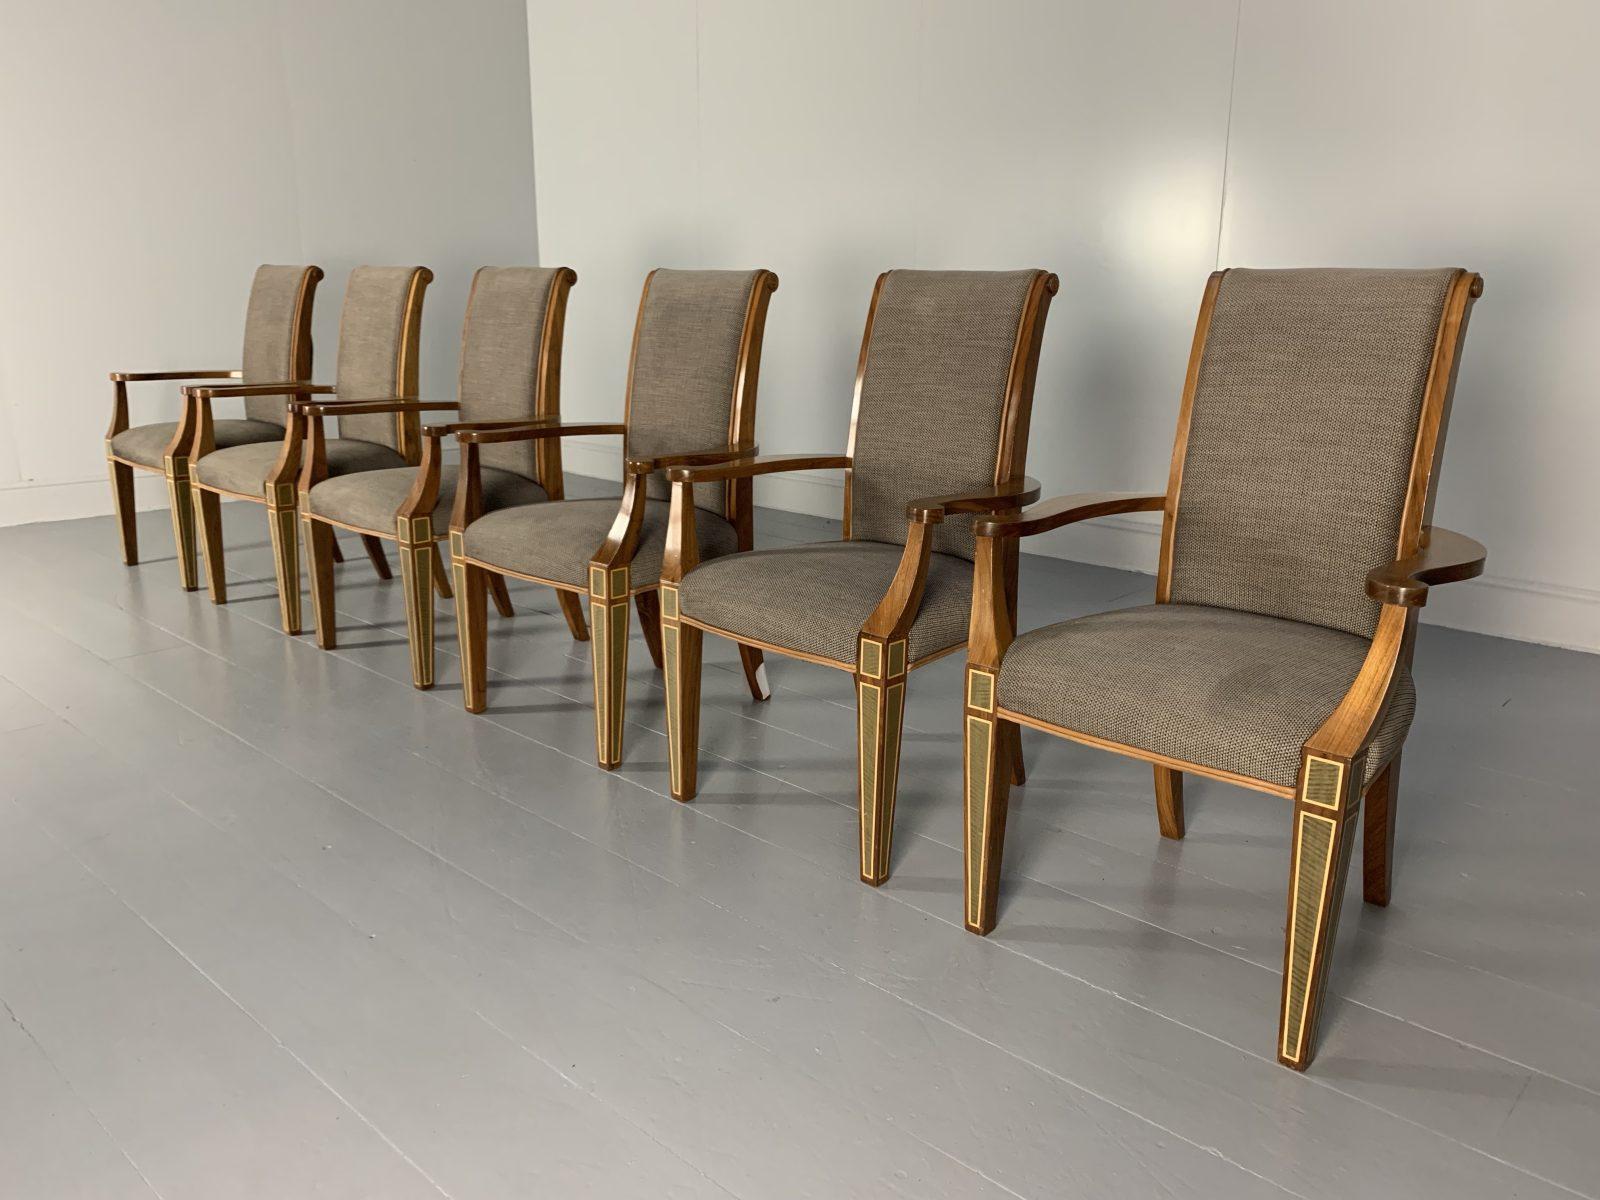 6 Linley “Carver” Dining Chairs, in Woven Fabric & Leather 1